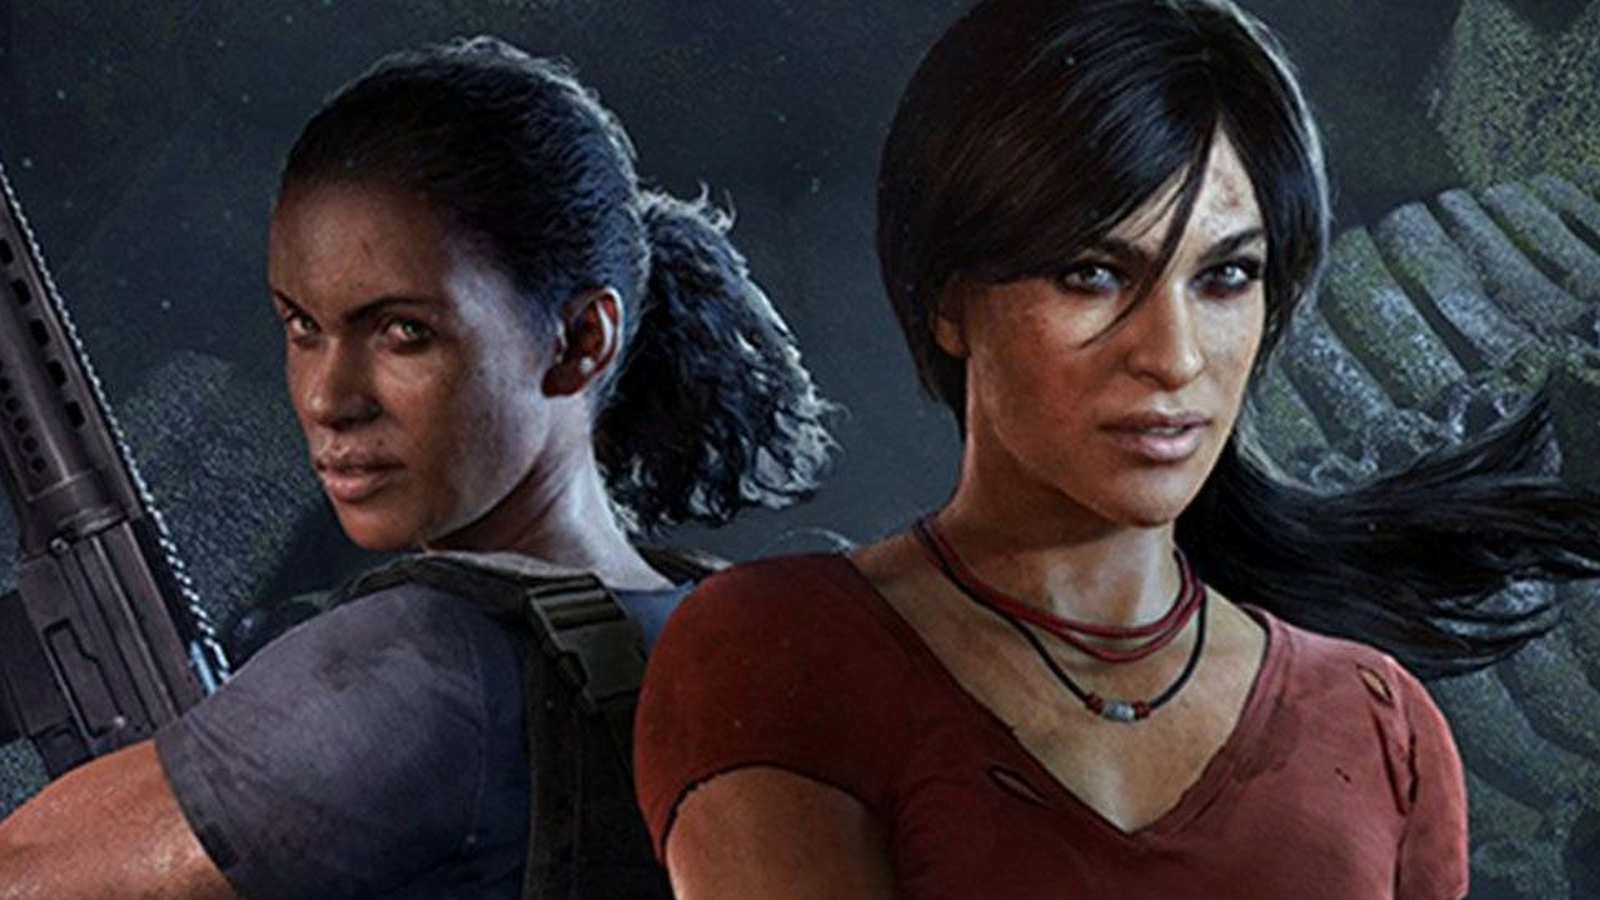 Uncharted: Legacy of Thieves Walkthrough - Uncharted: Legacy of